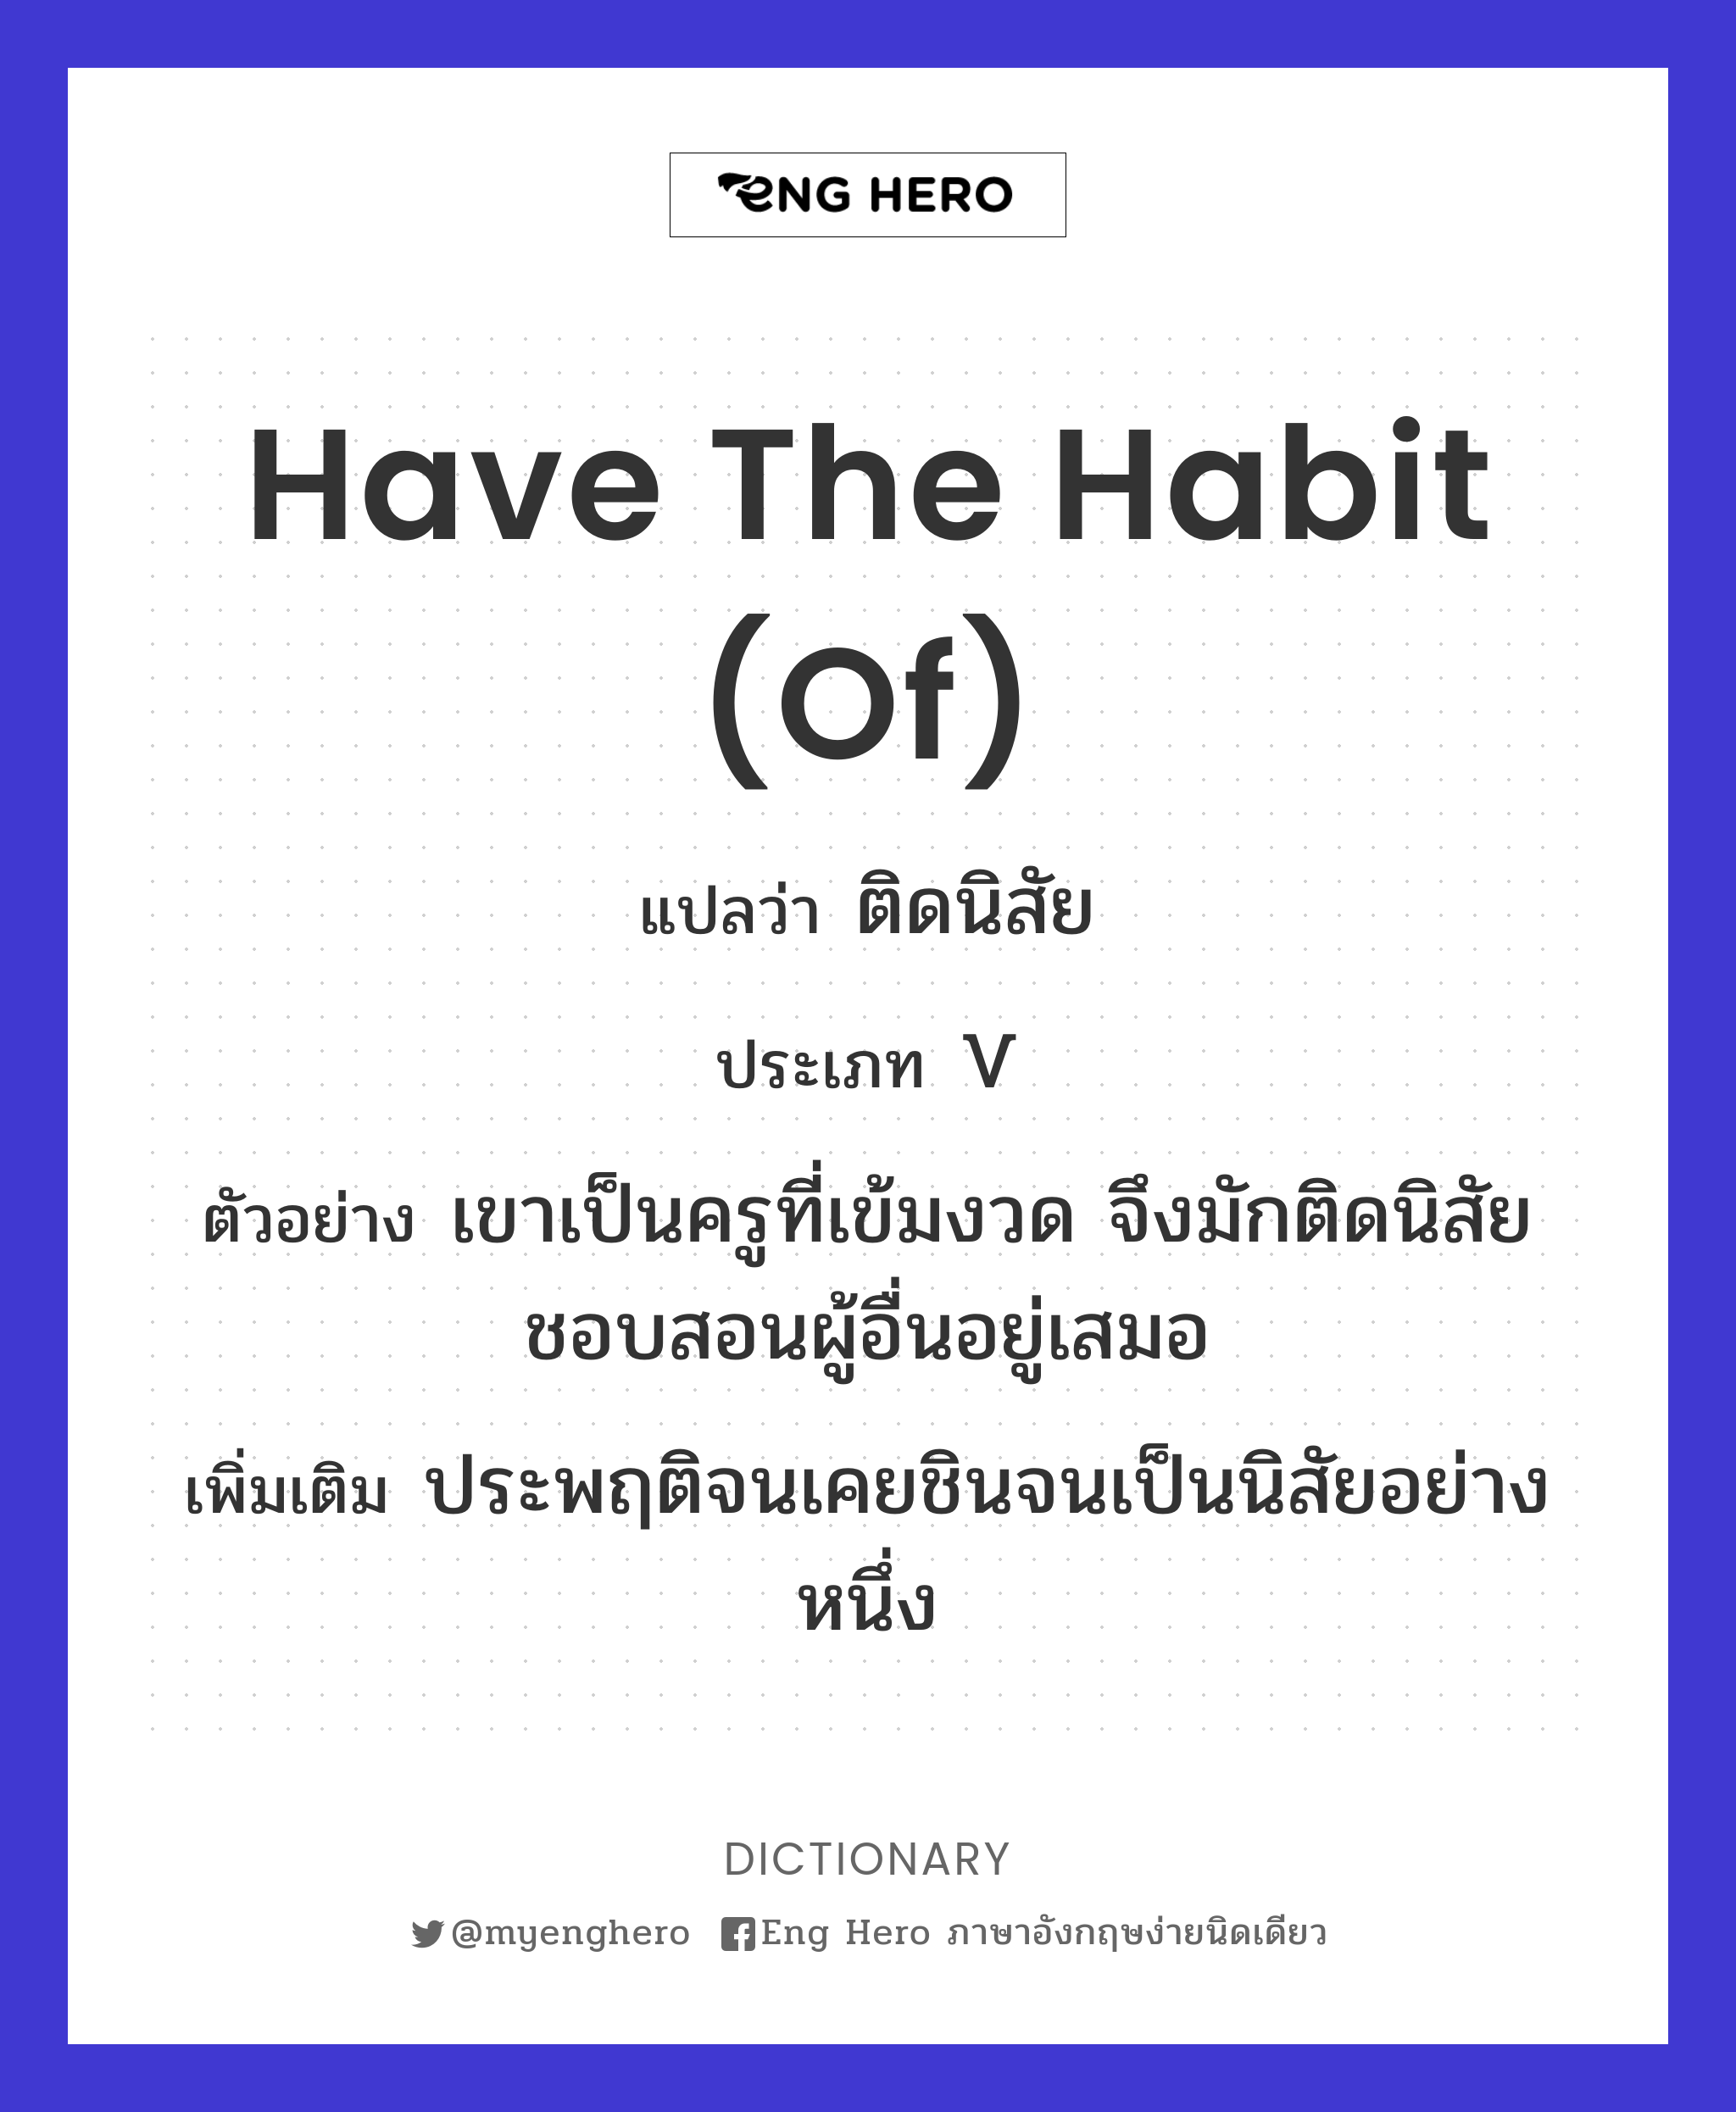 have the habit (of)